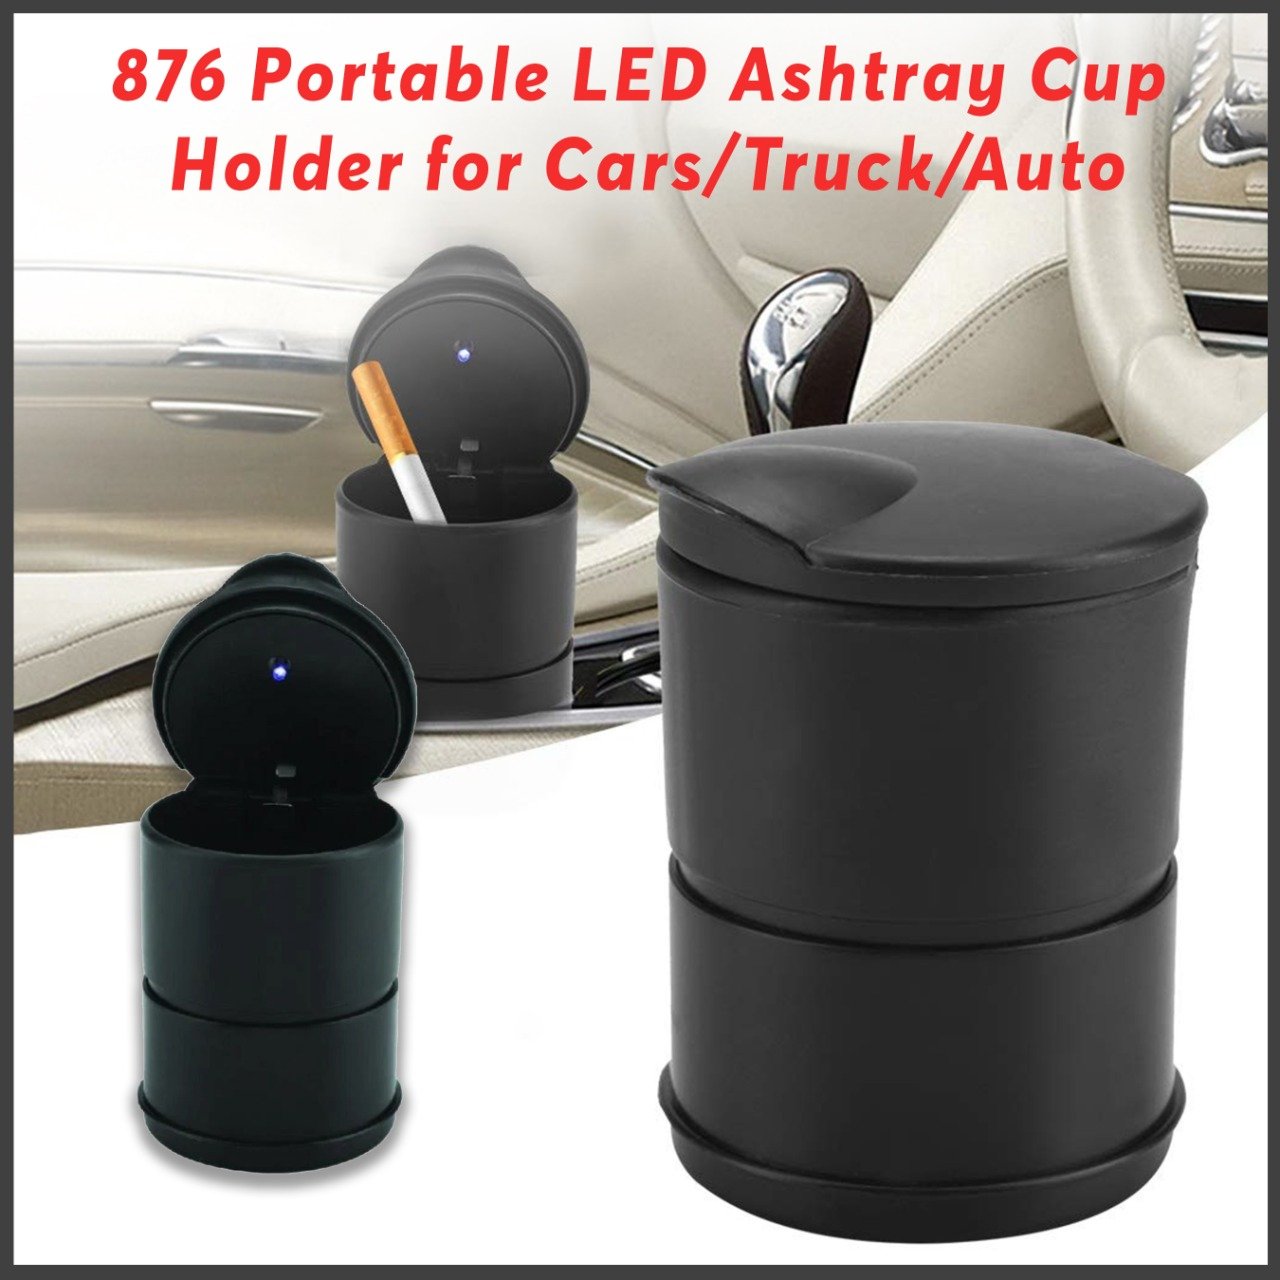 0876 Portable LED Ashtray Cup Holder for Cars/Truck/Auto - SkyShopy